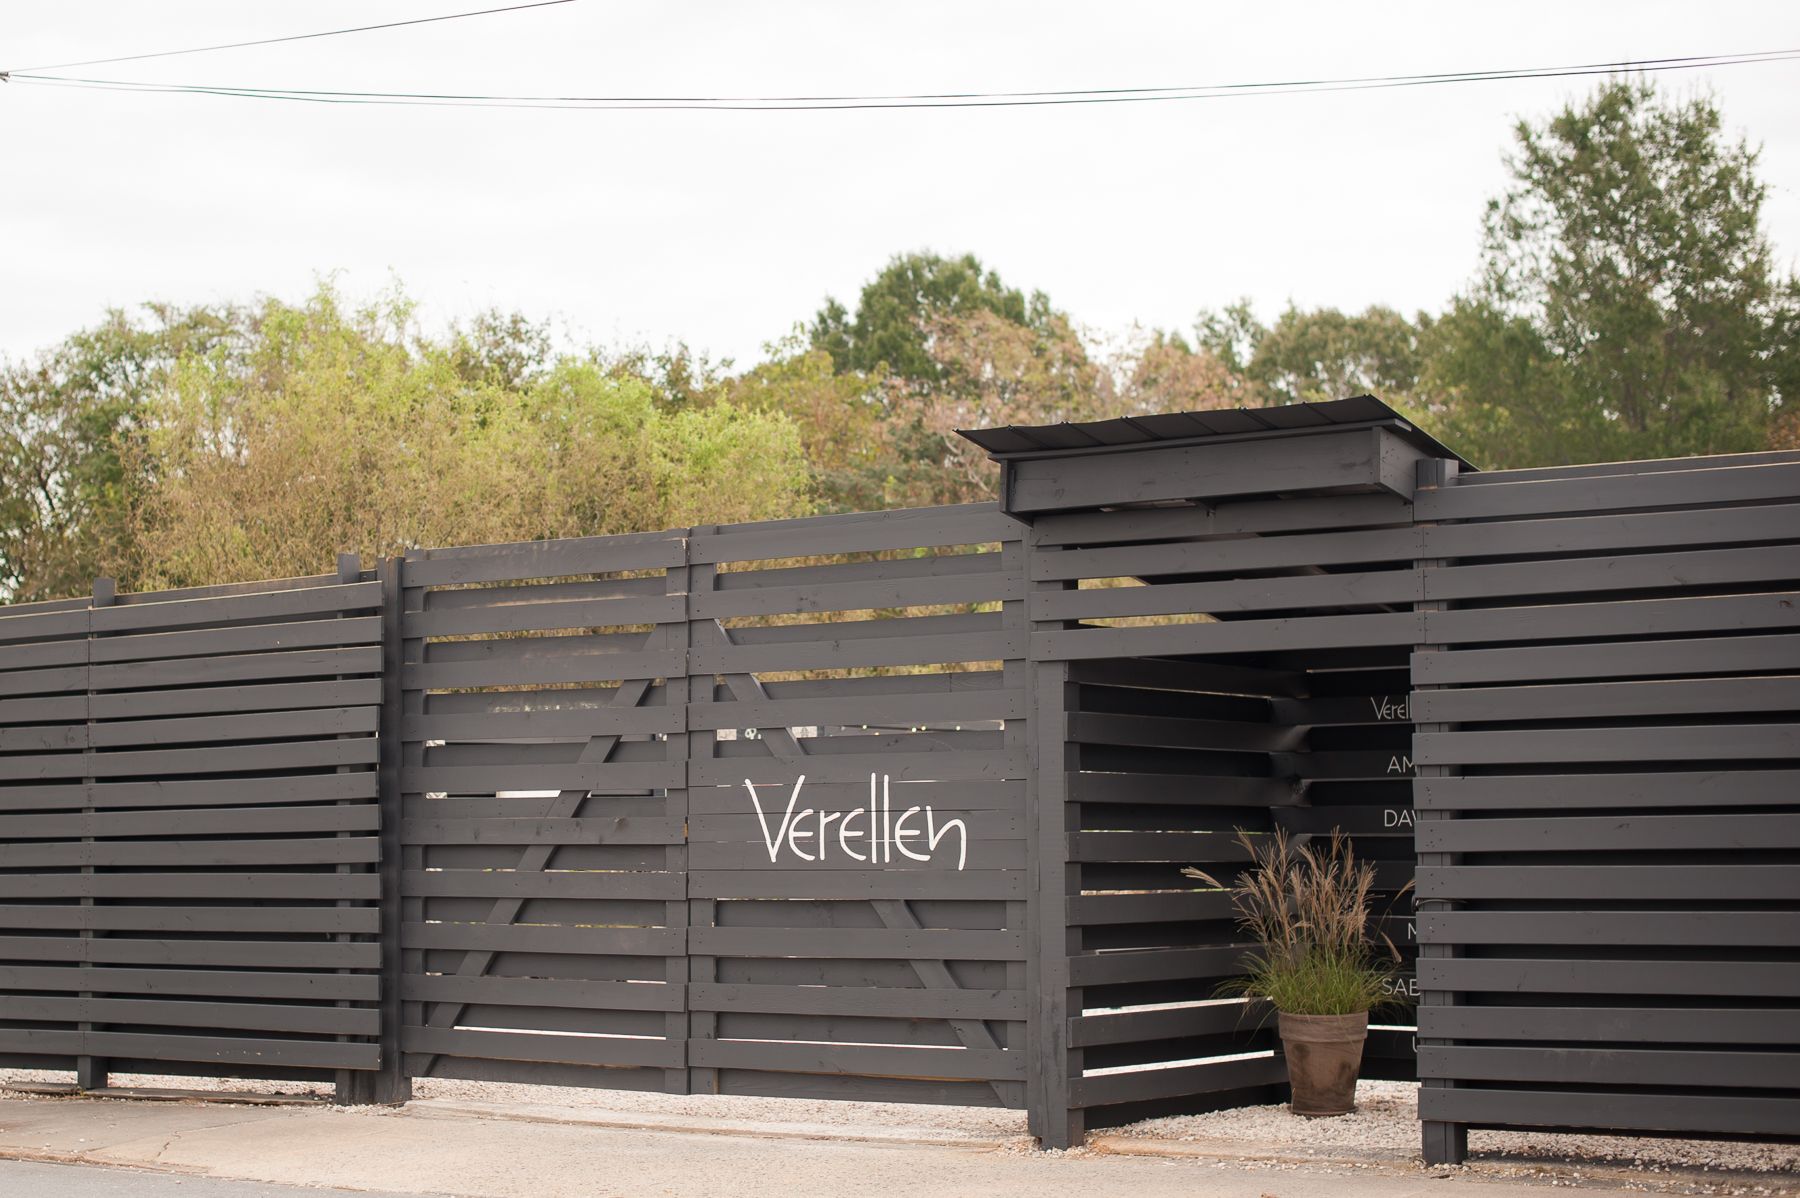 Verellen specializes in sofas, loveseats, chairs and sectionals, dining room banquettes and chairs, and upholstered beds and headboards. Their favorite outfits are in Belgian linen and leather with dressmaker attention to detail. | Maria West Photography